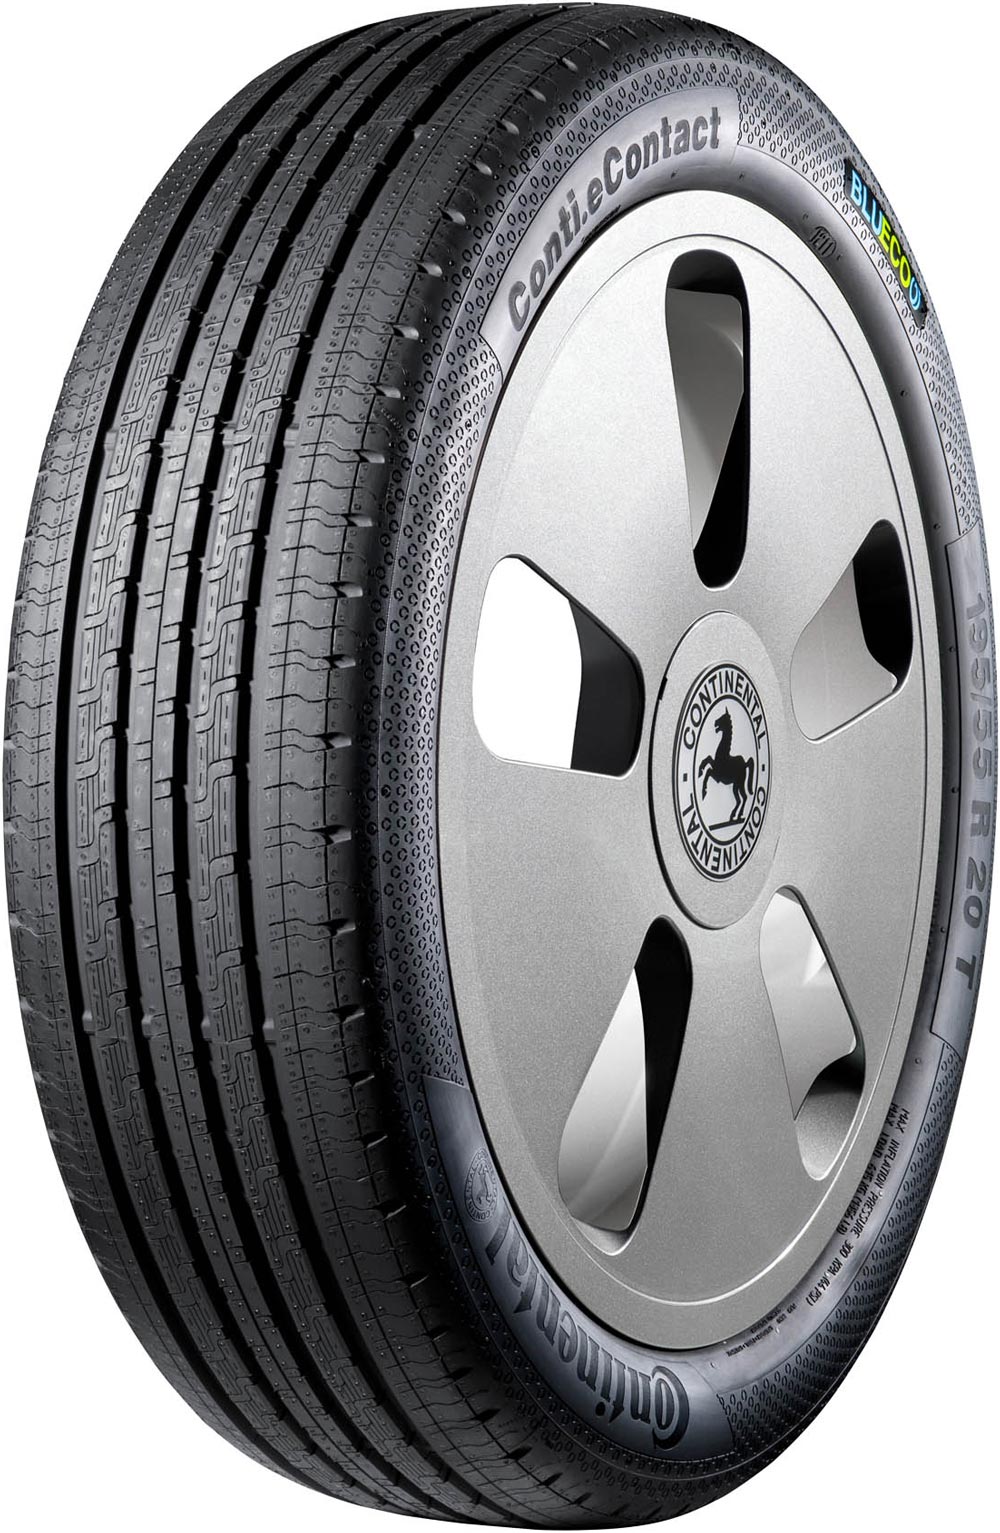 Anvelope auto CONTINENTAL Conti eContact 125/80 R13 65M